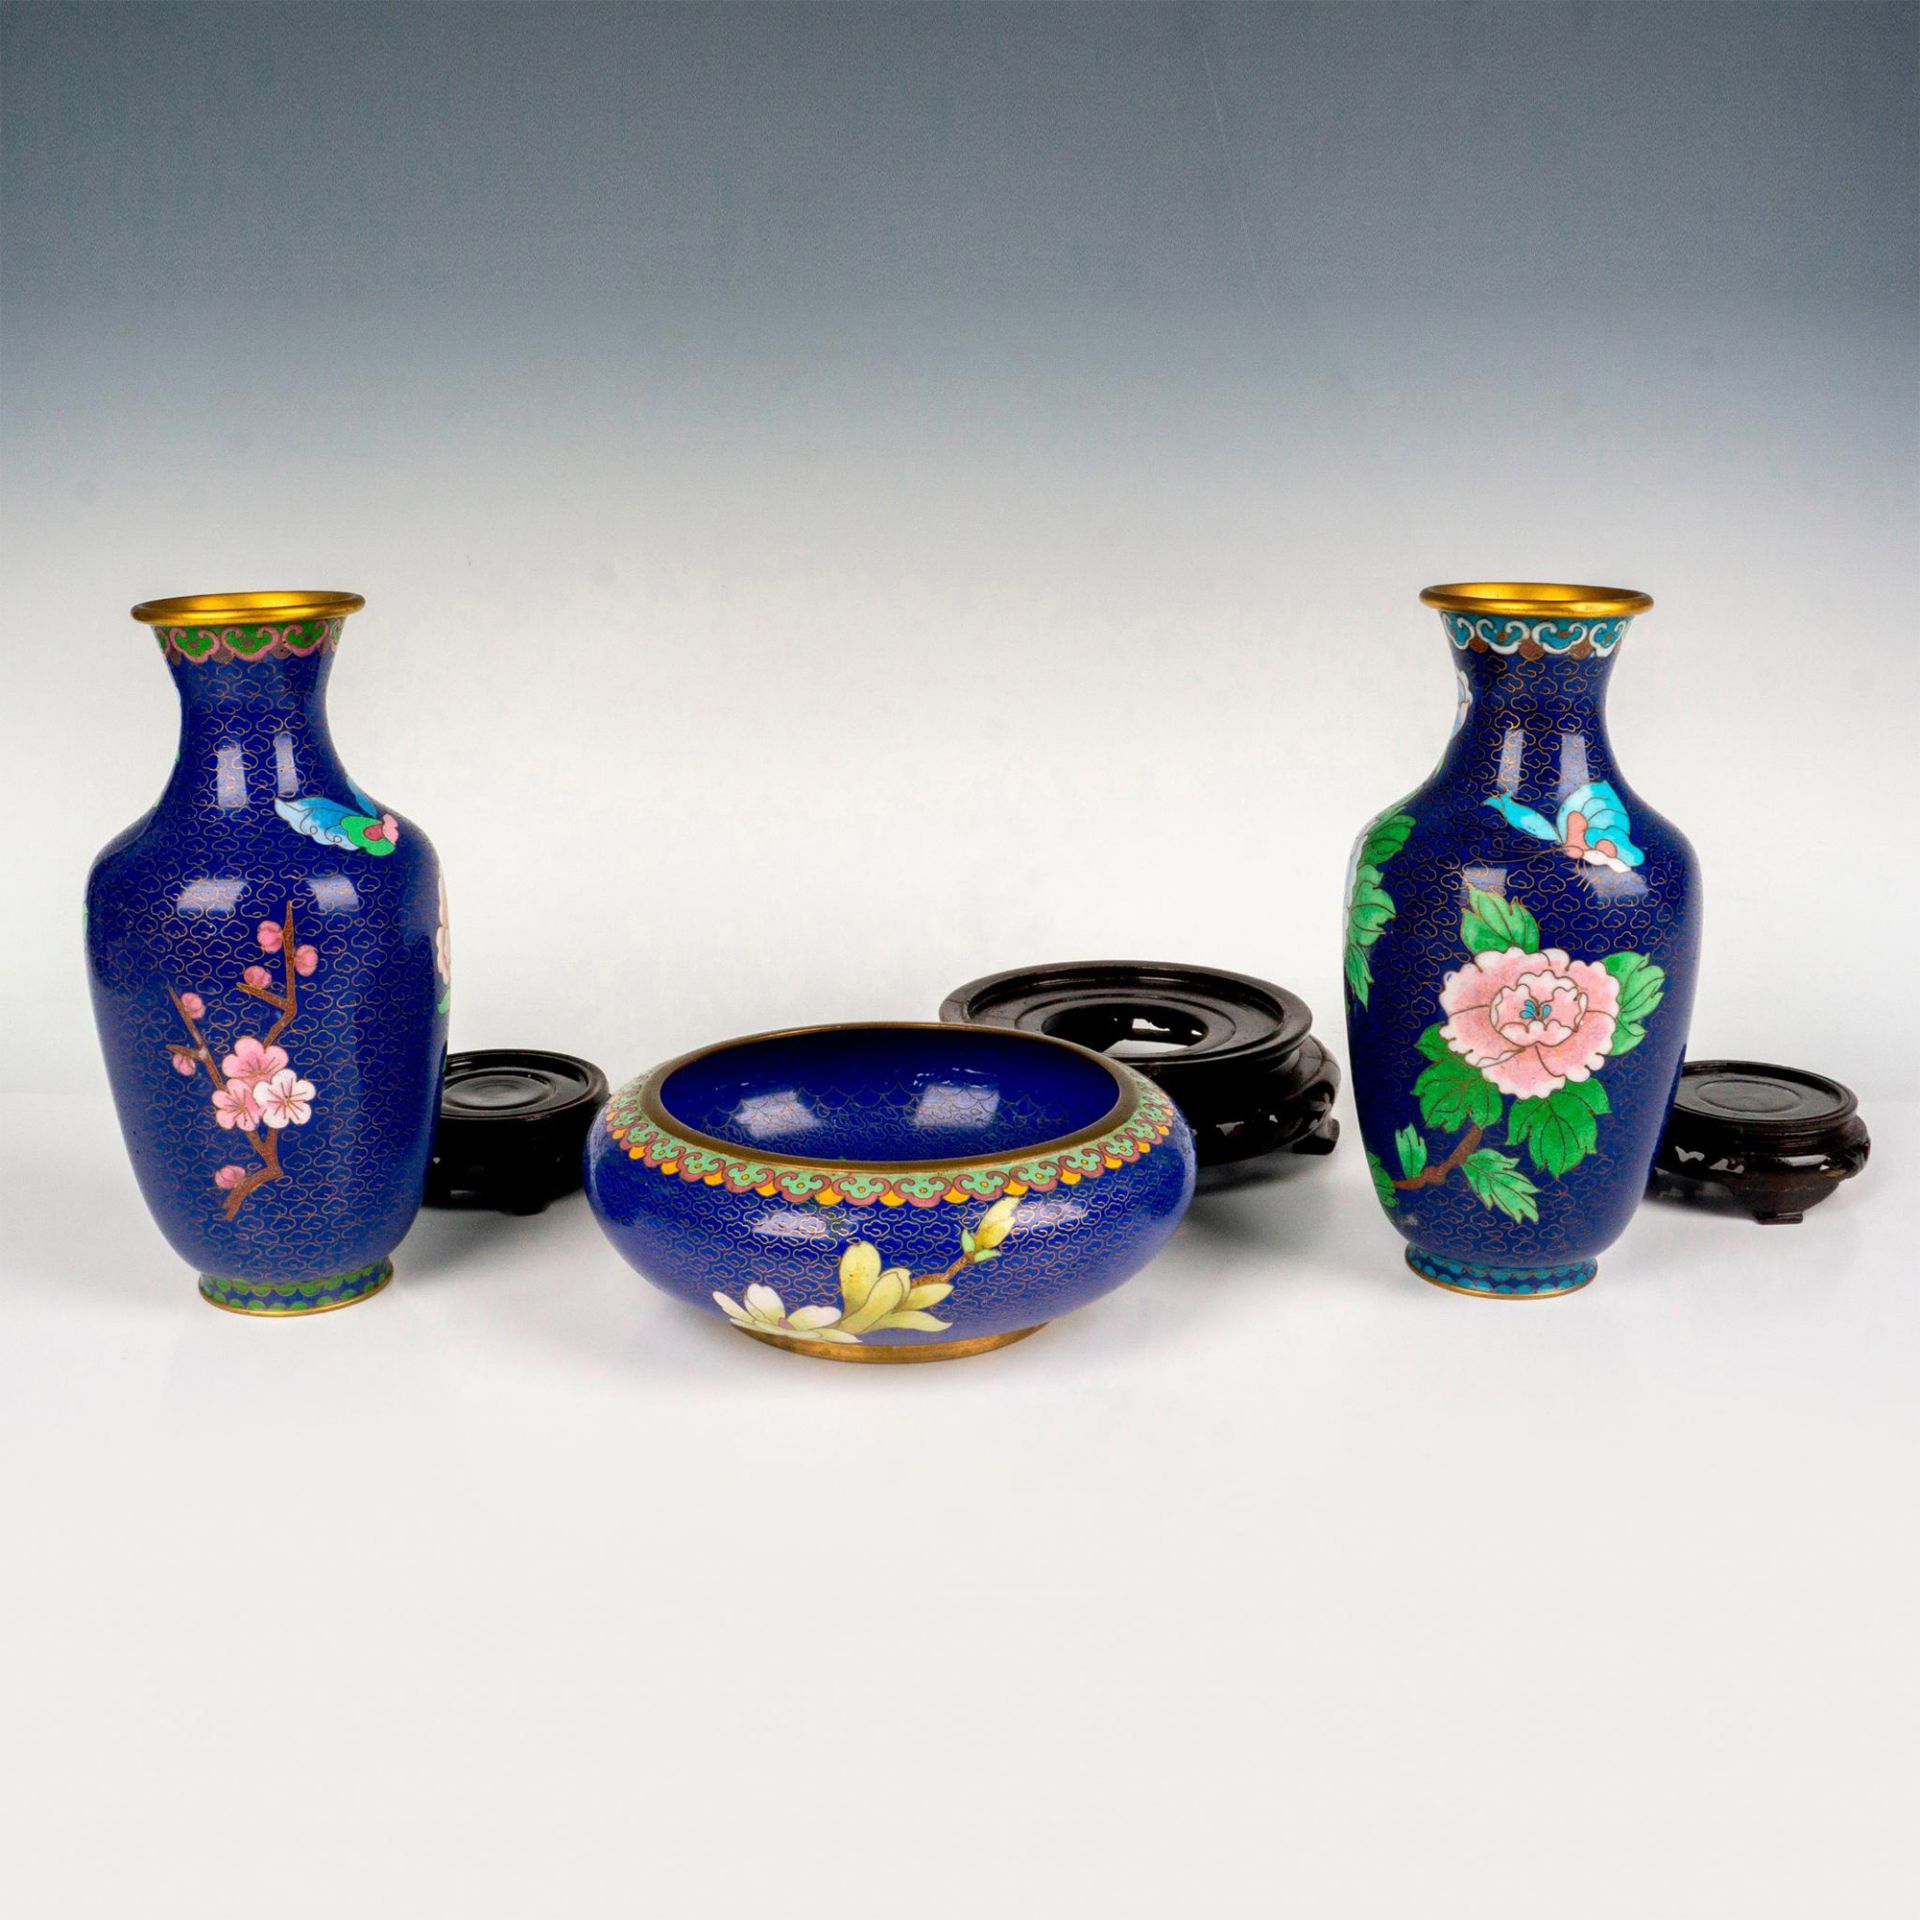 3pc Zi Jin Cheng Chinese Blue Cloisonne Vases - Image 2 of 3